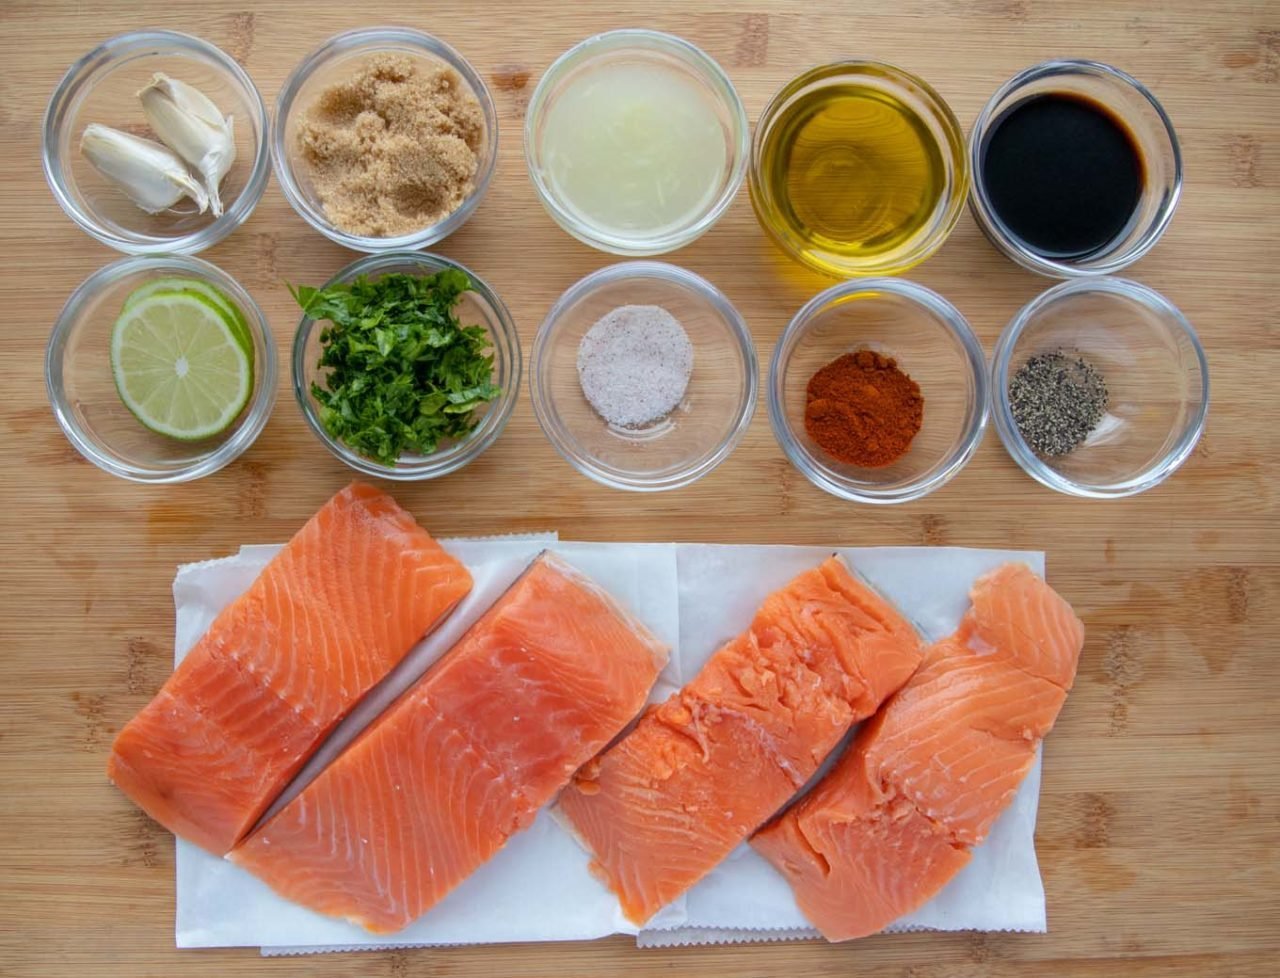 ingredients for marinade in glass bowls with salmon fillets on white paper